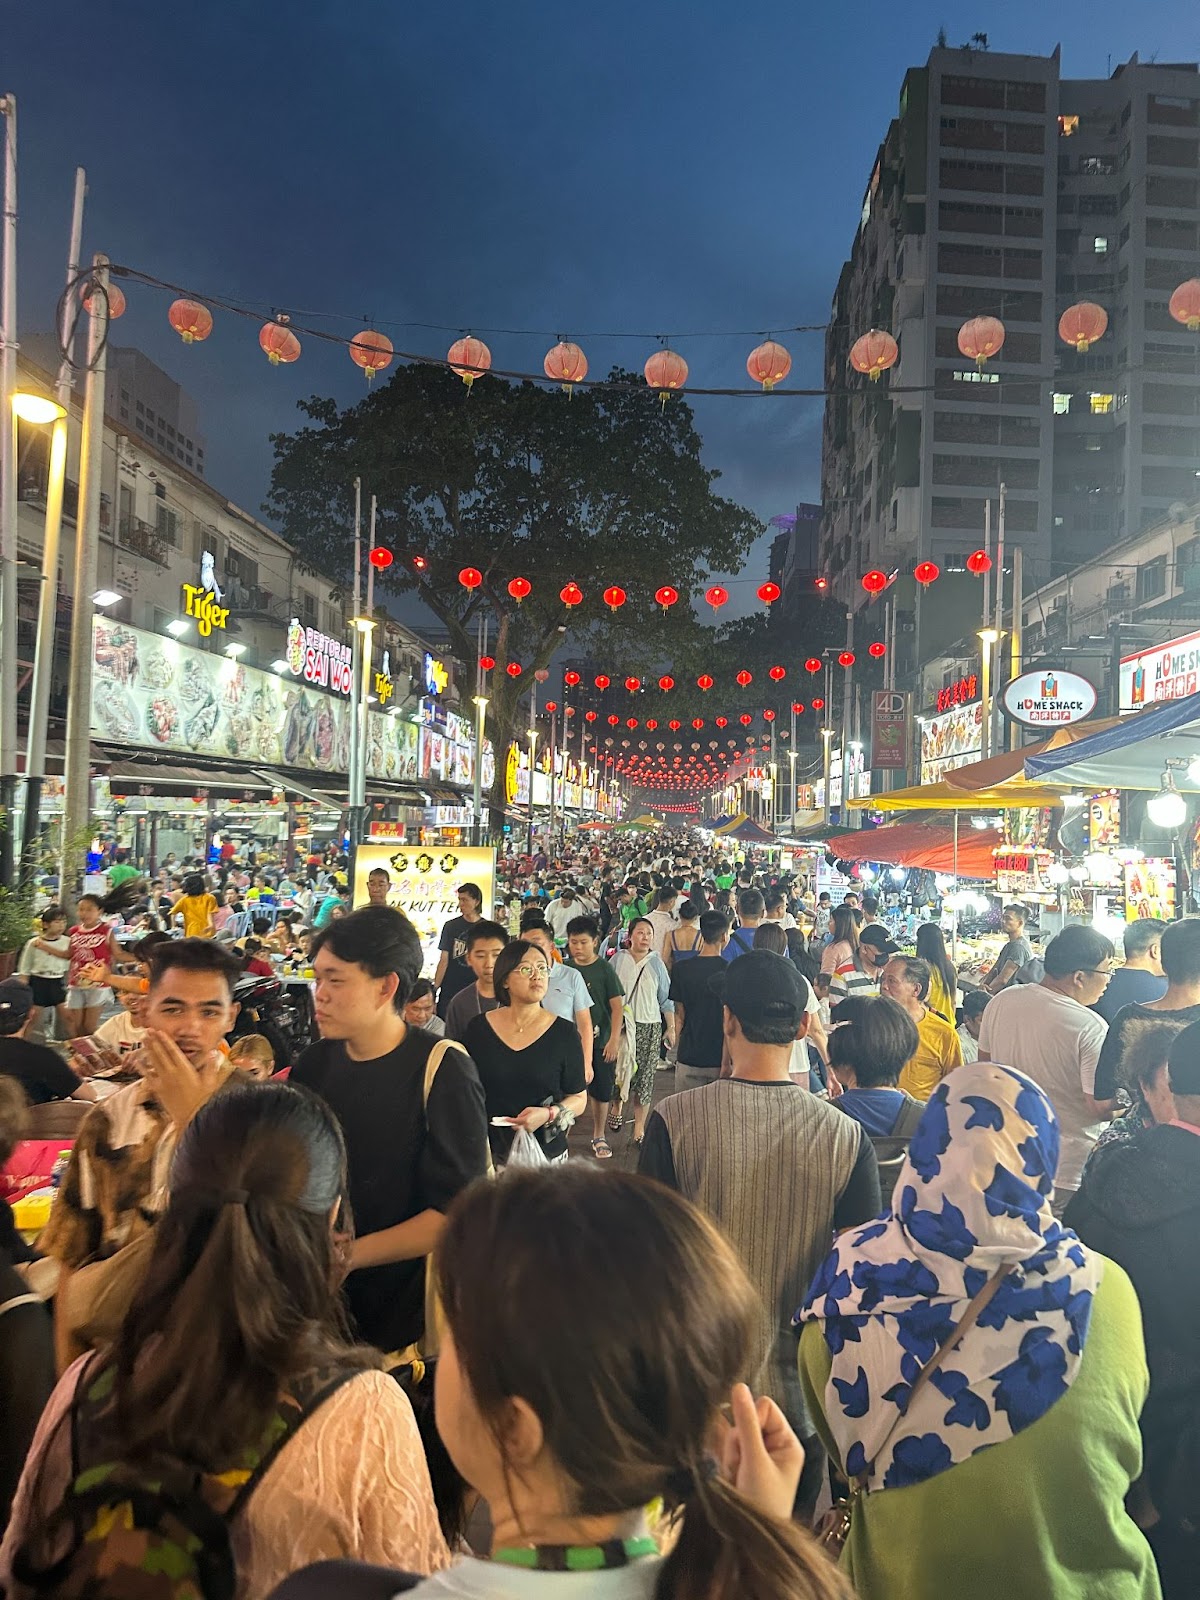 I brought my friends from macau to wong ah wah restaurant at jalan alor and the service was a major letdown | weirdkaya